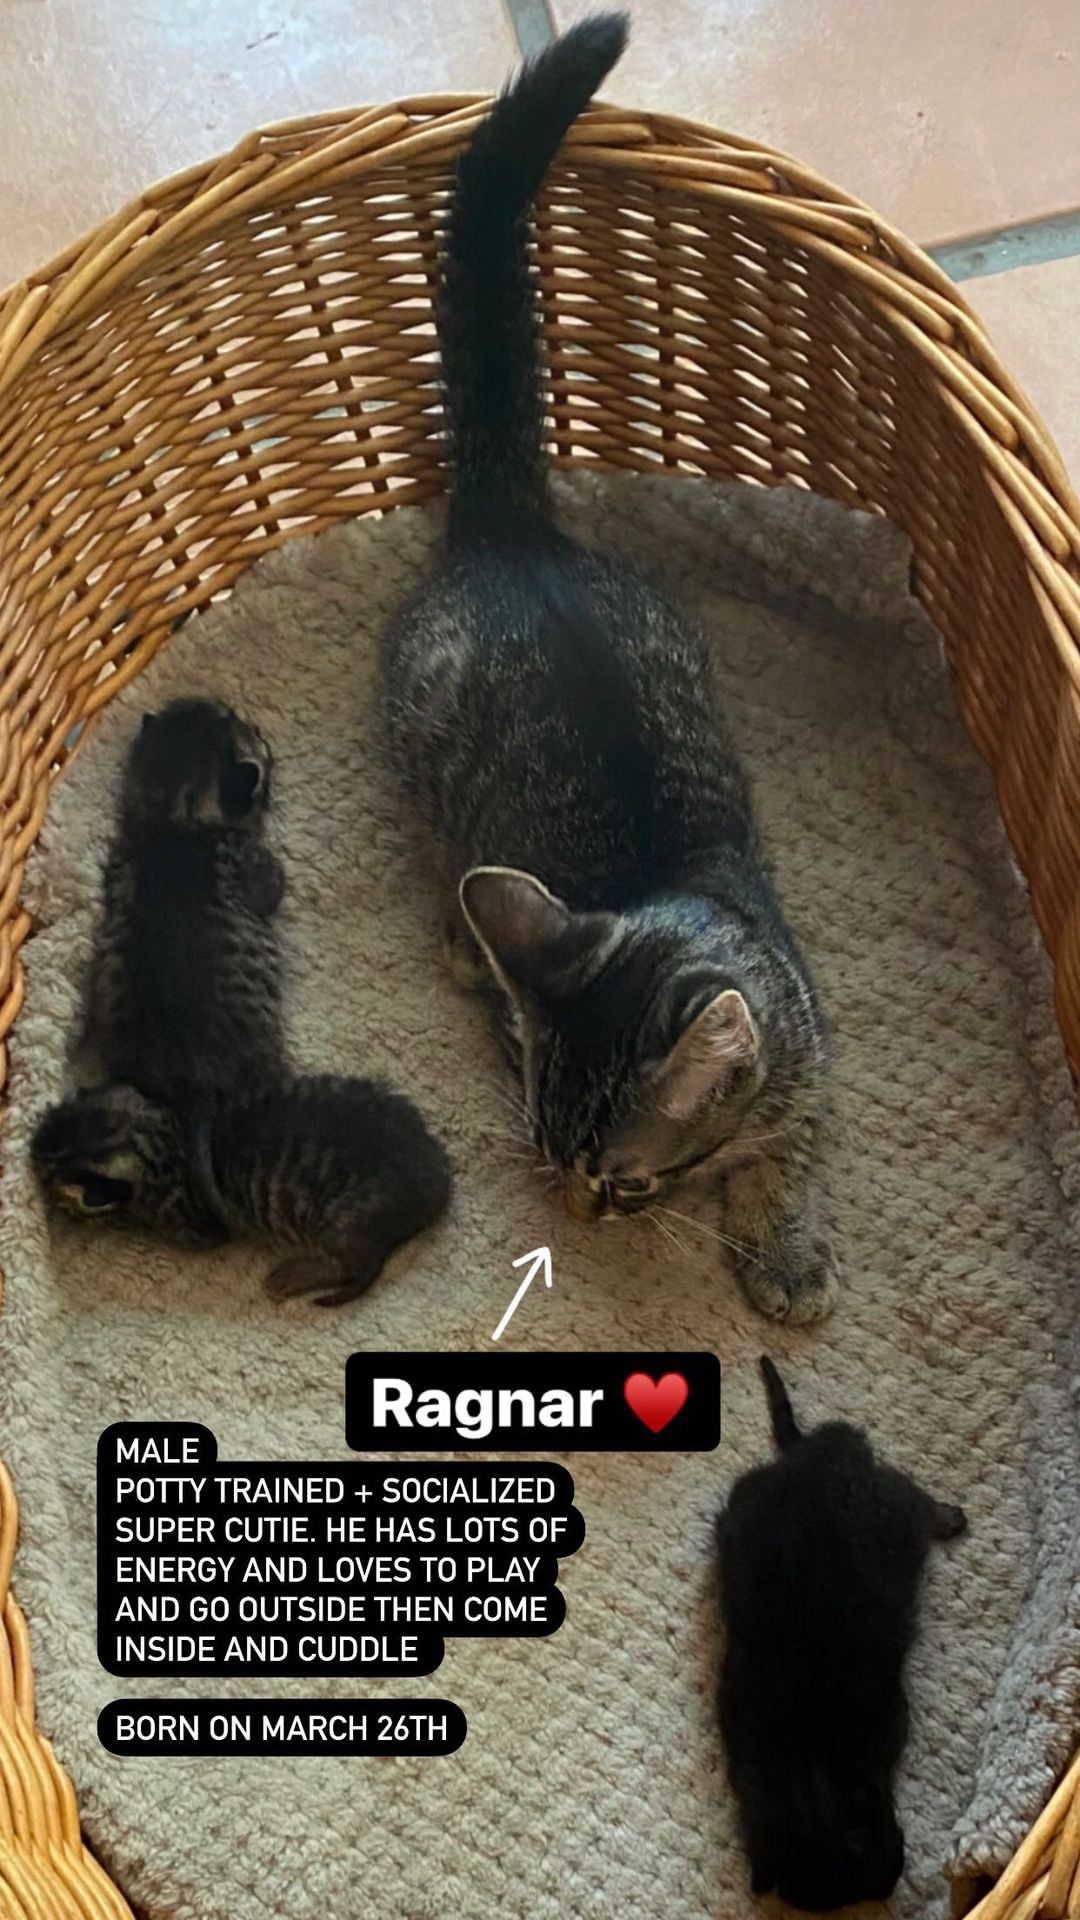 a picture of Mama cat paisley Ann and her 2 kittens rambo + bear. Mama cat Stromi may and her 4 kittens. Then 2 male kittens Romeo and marlon Brando  a cat that needs a foster home.